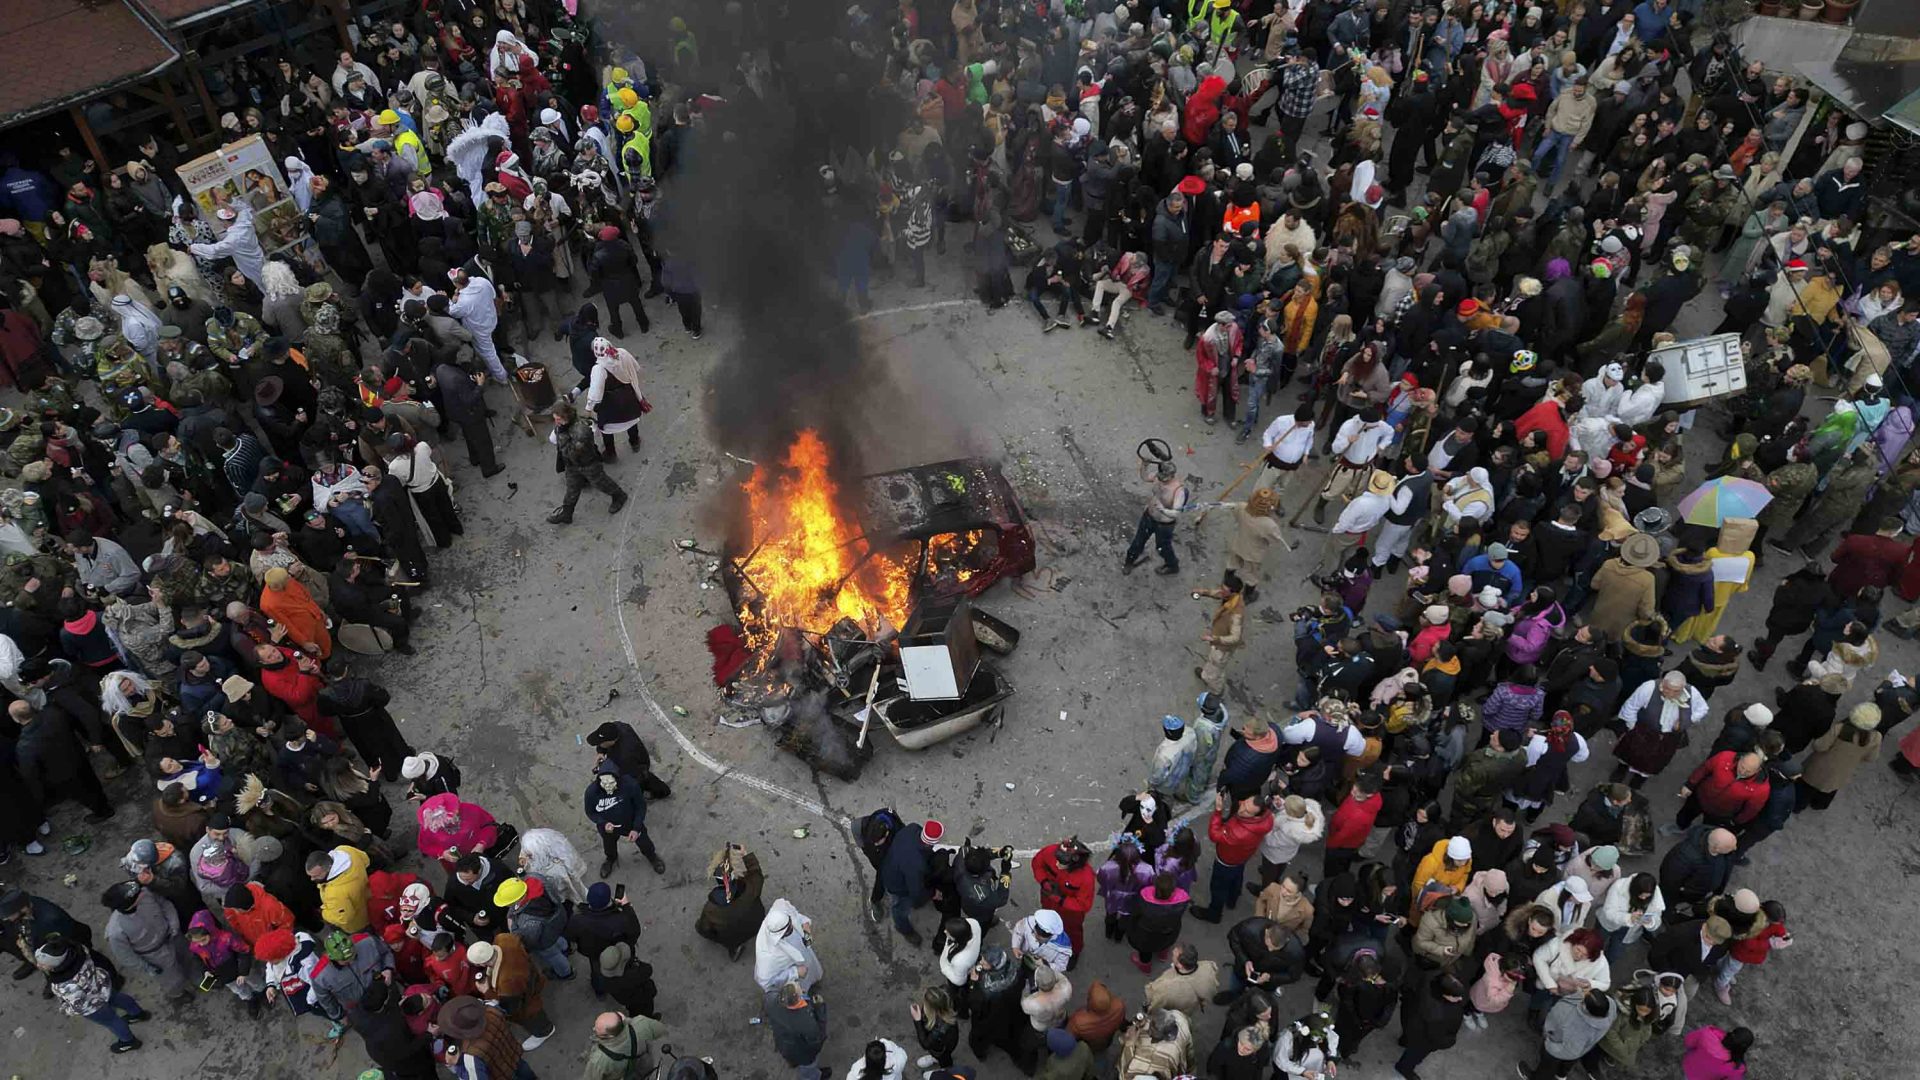 Crowds gather to burn things in the street.